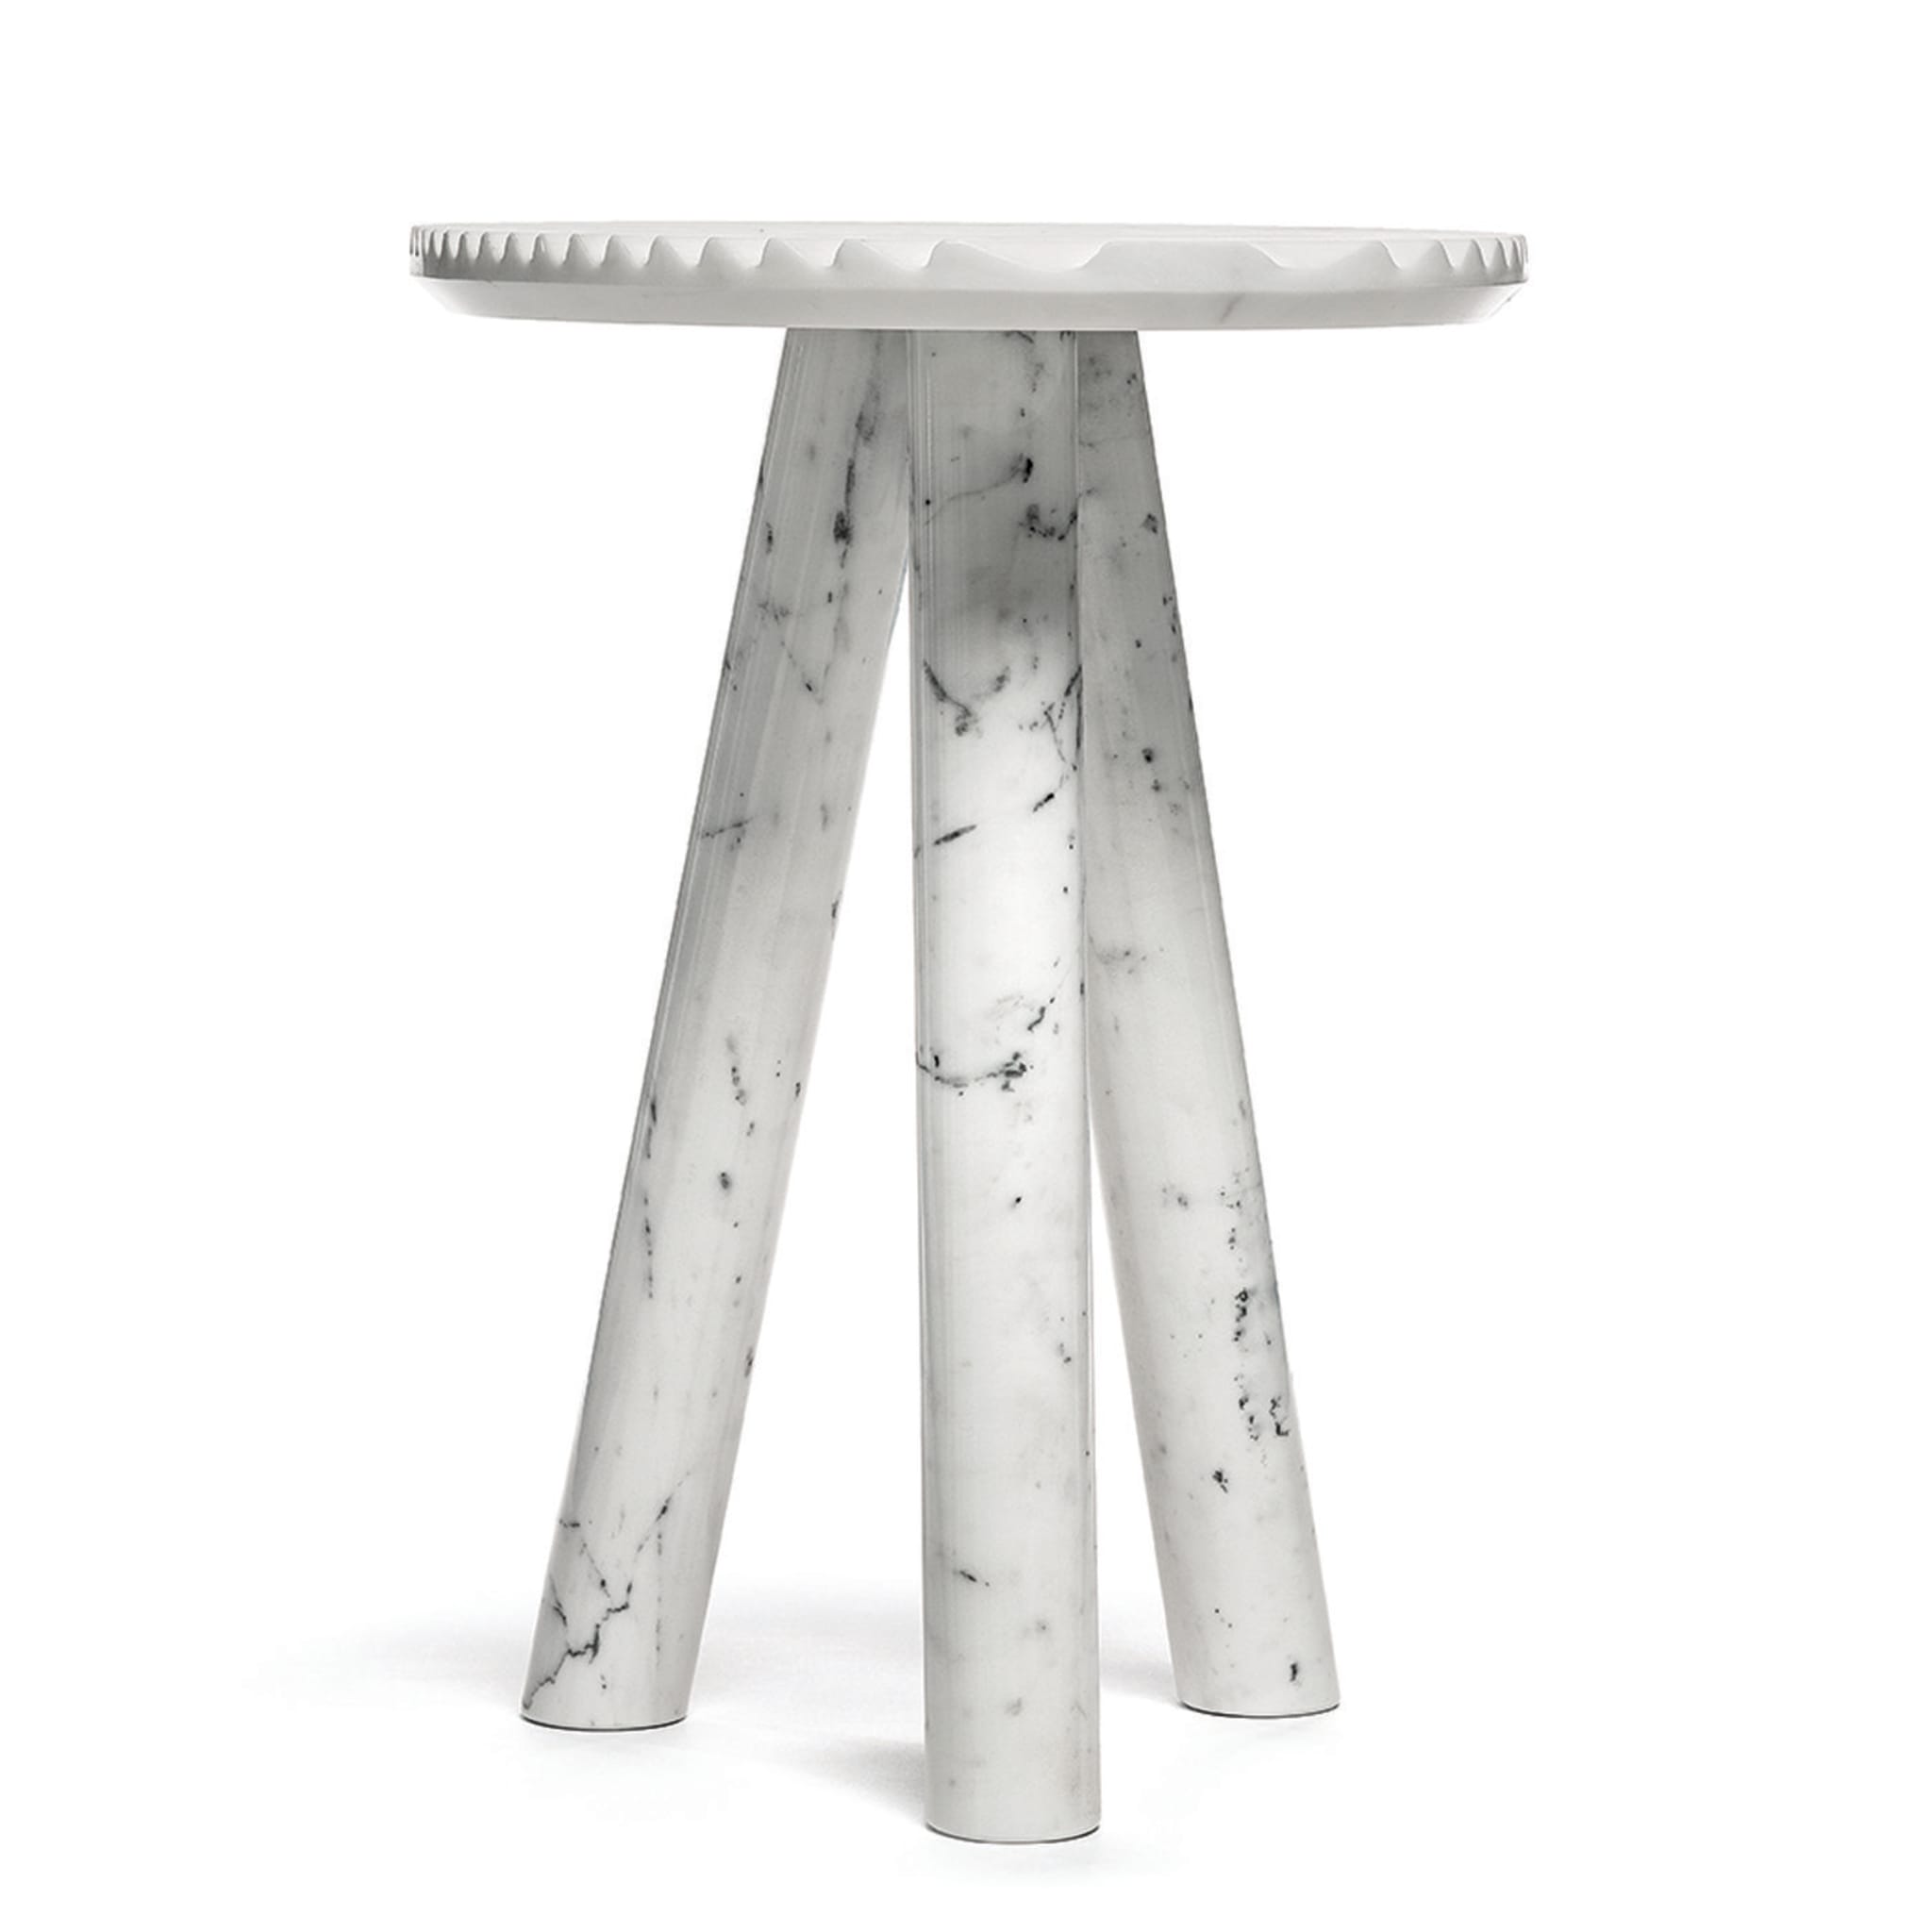 White Rabbet Side Table by Patricia Urquiola - Alternative view 1